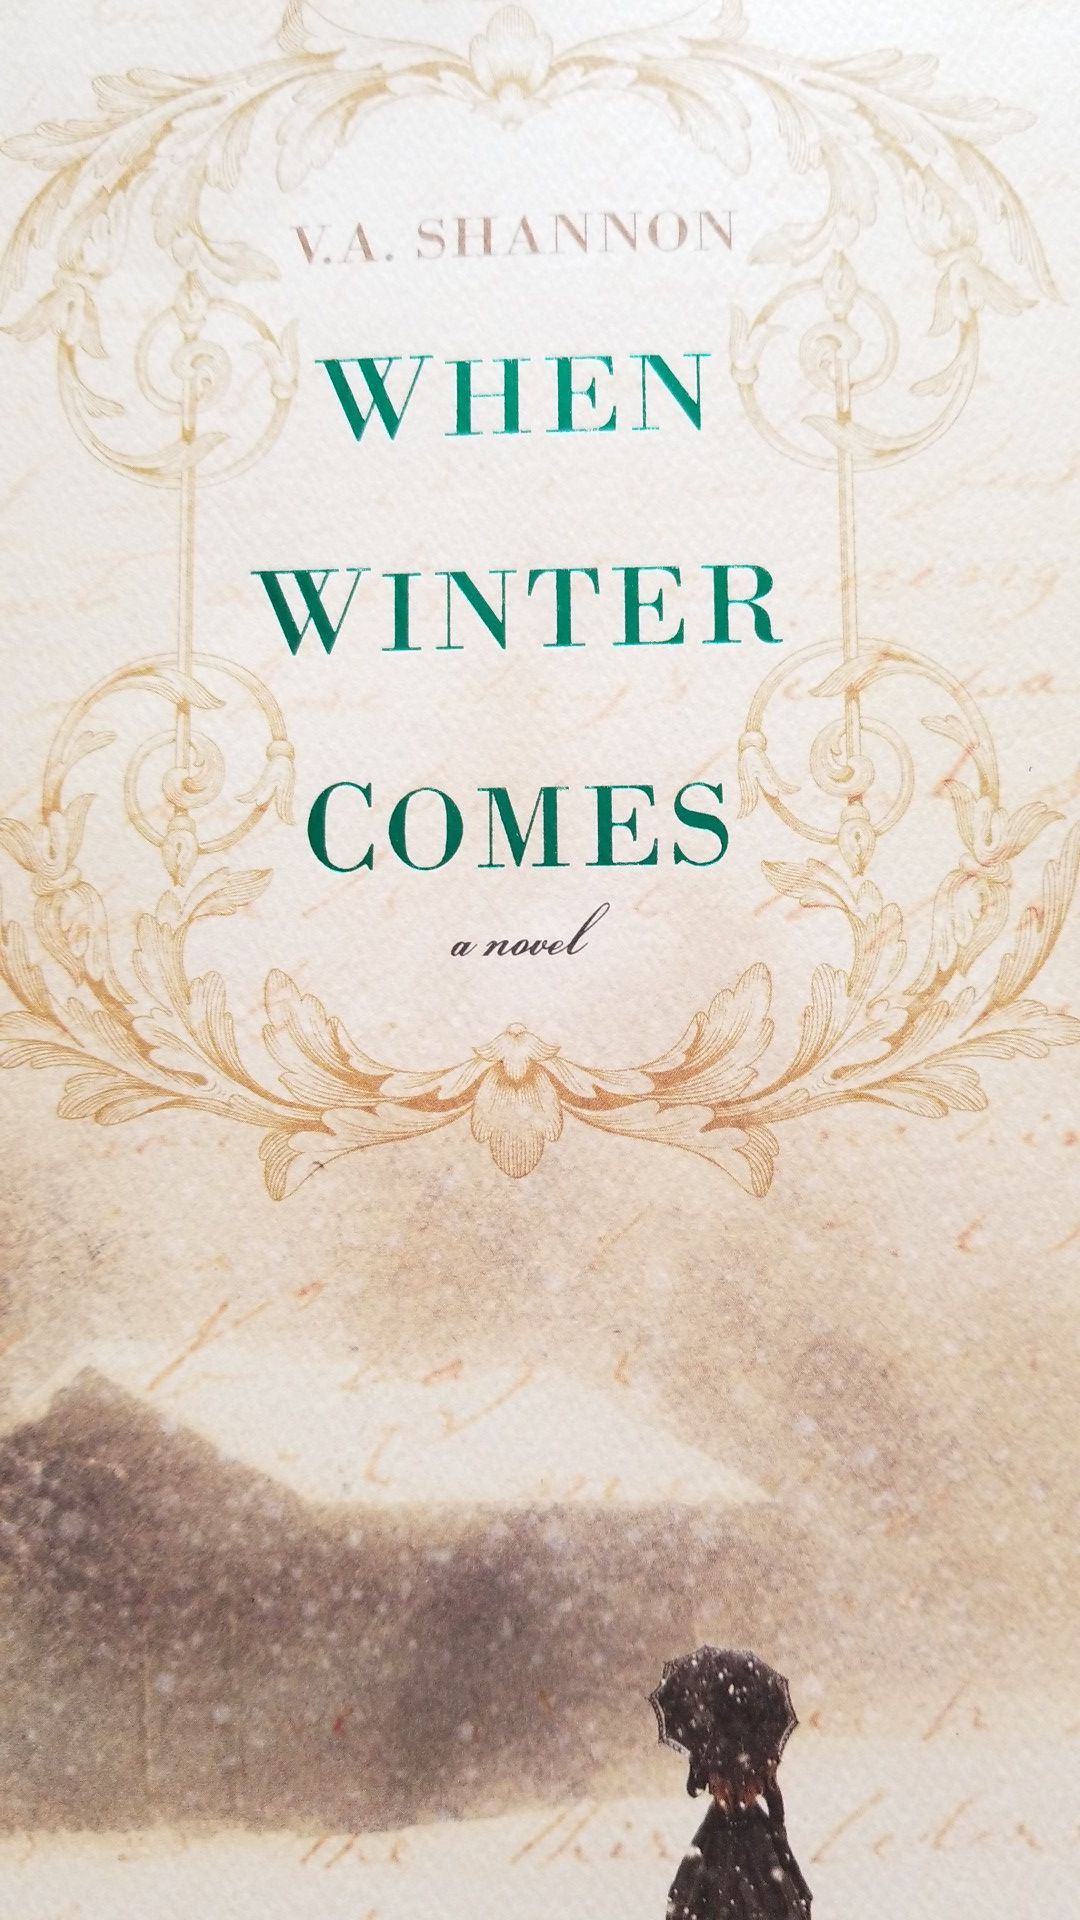 When Winter Comes by V.A. Shannon